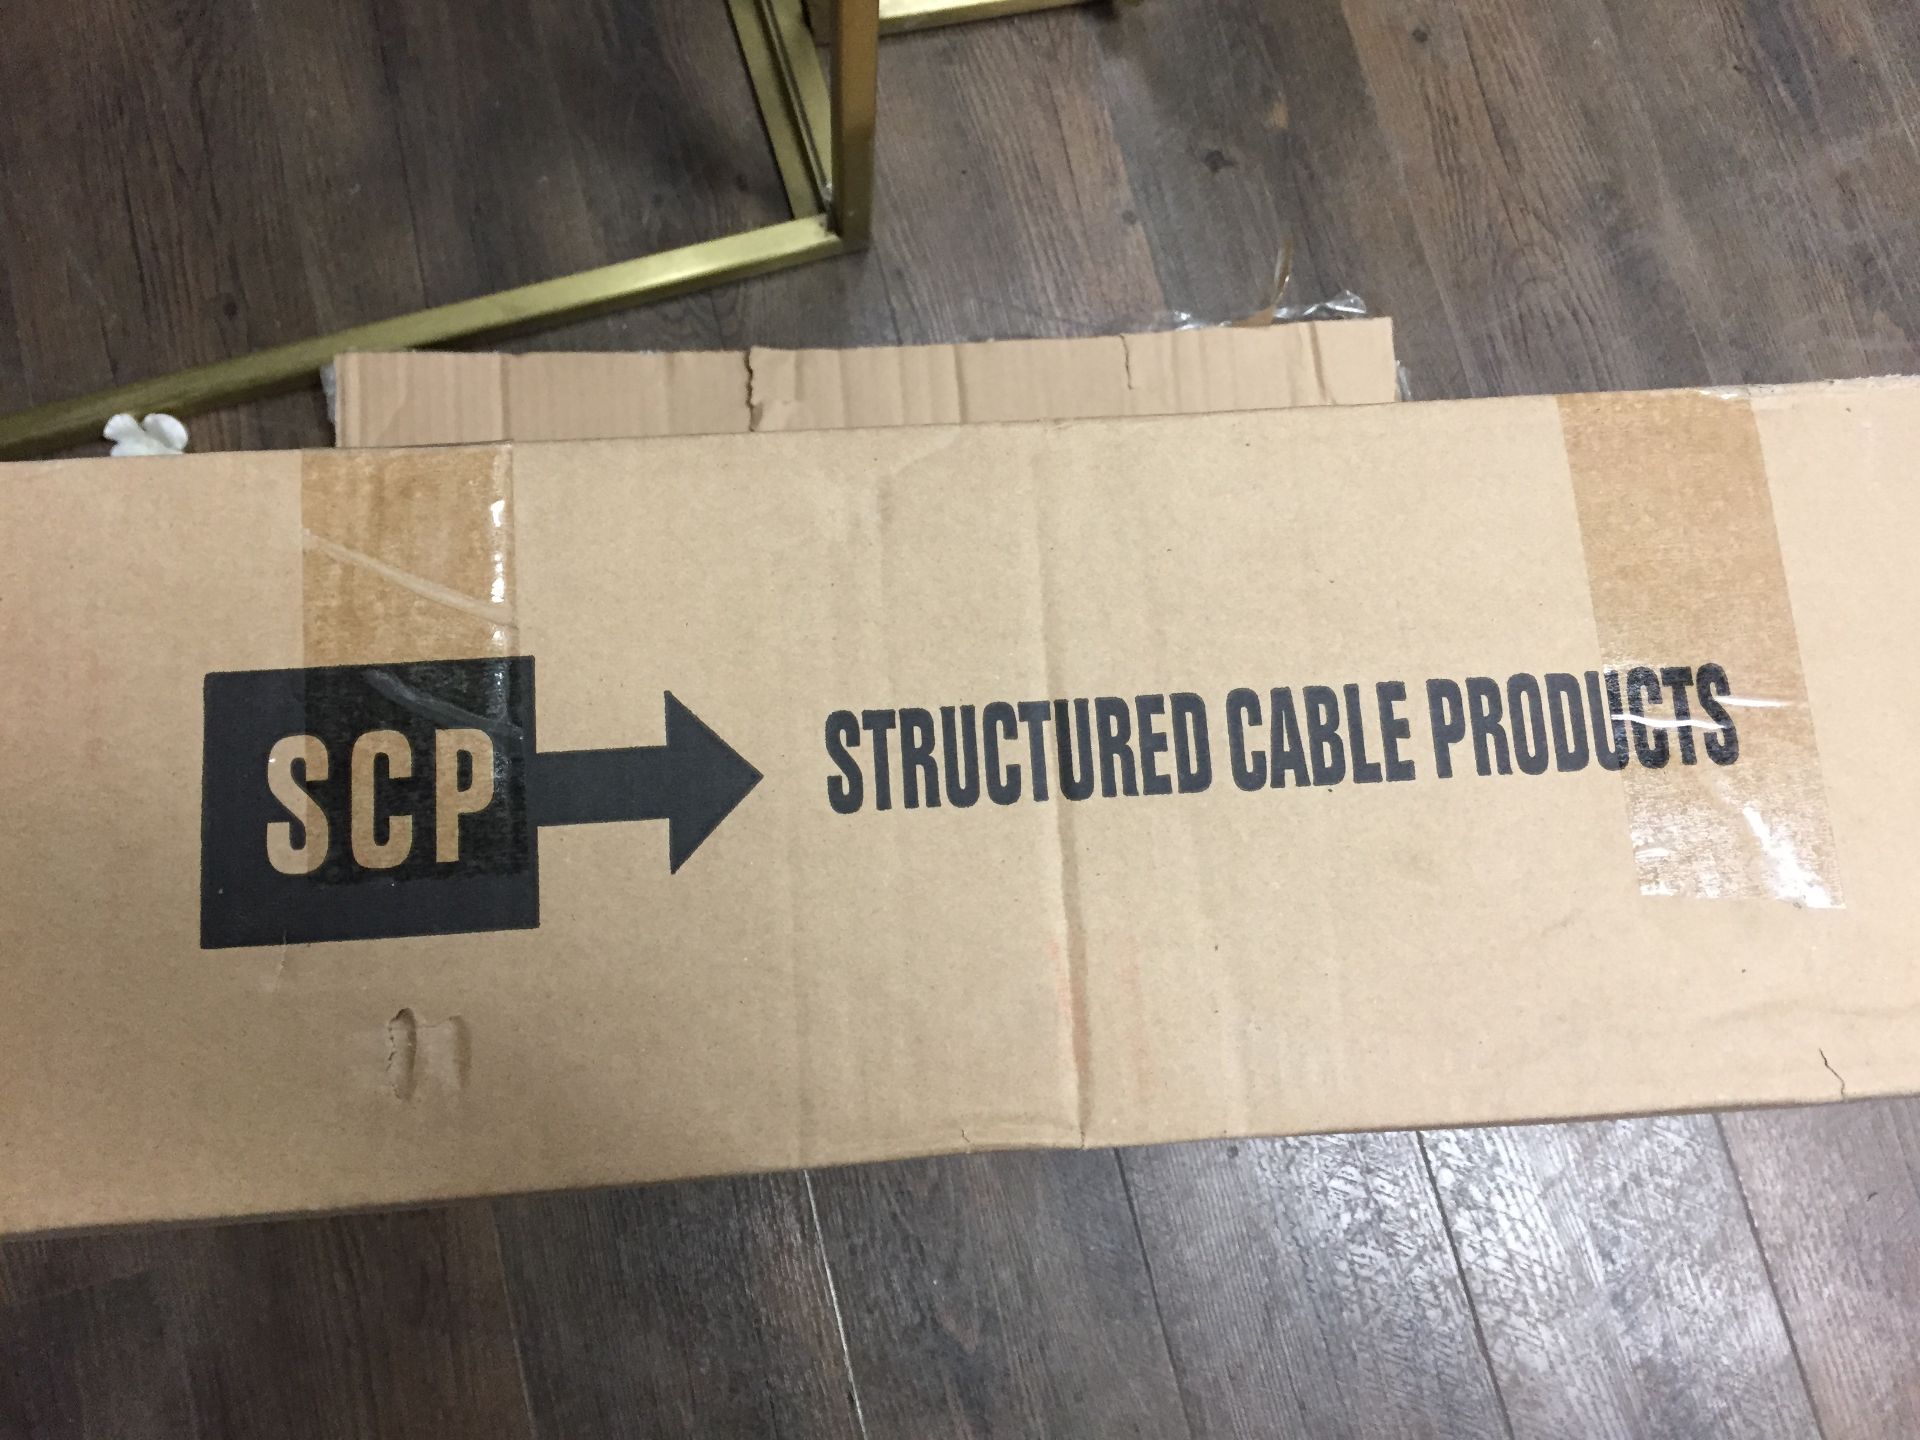 SCP STRUCTURED CABLE PRODUCTS - Image 4 of 4